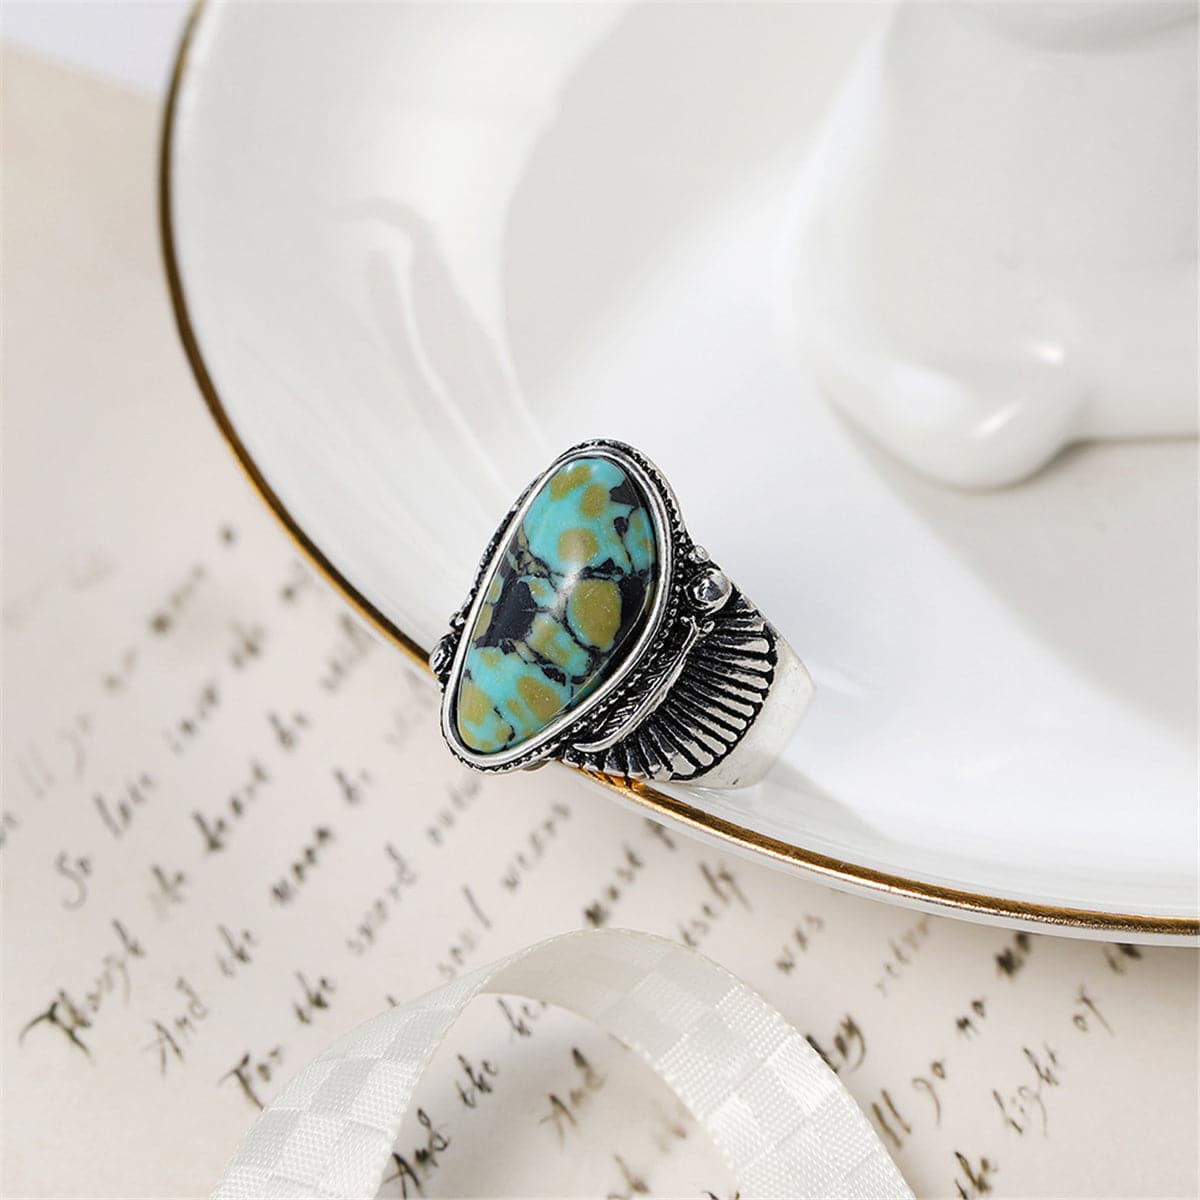 Turquoise & Silver-Plated Band Ring